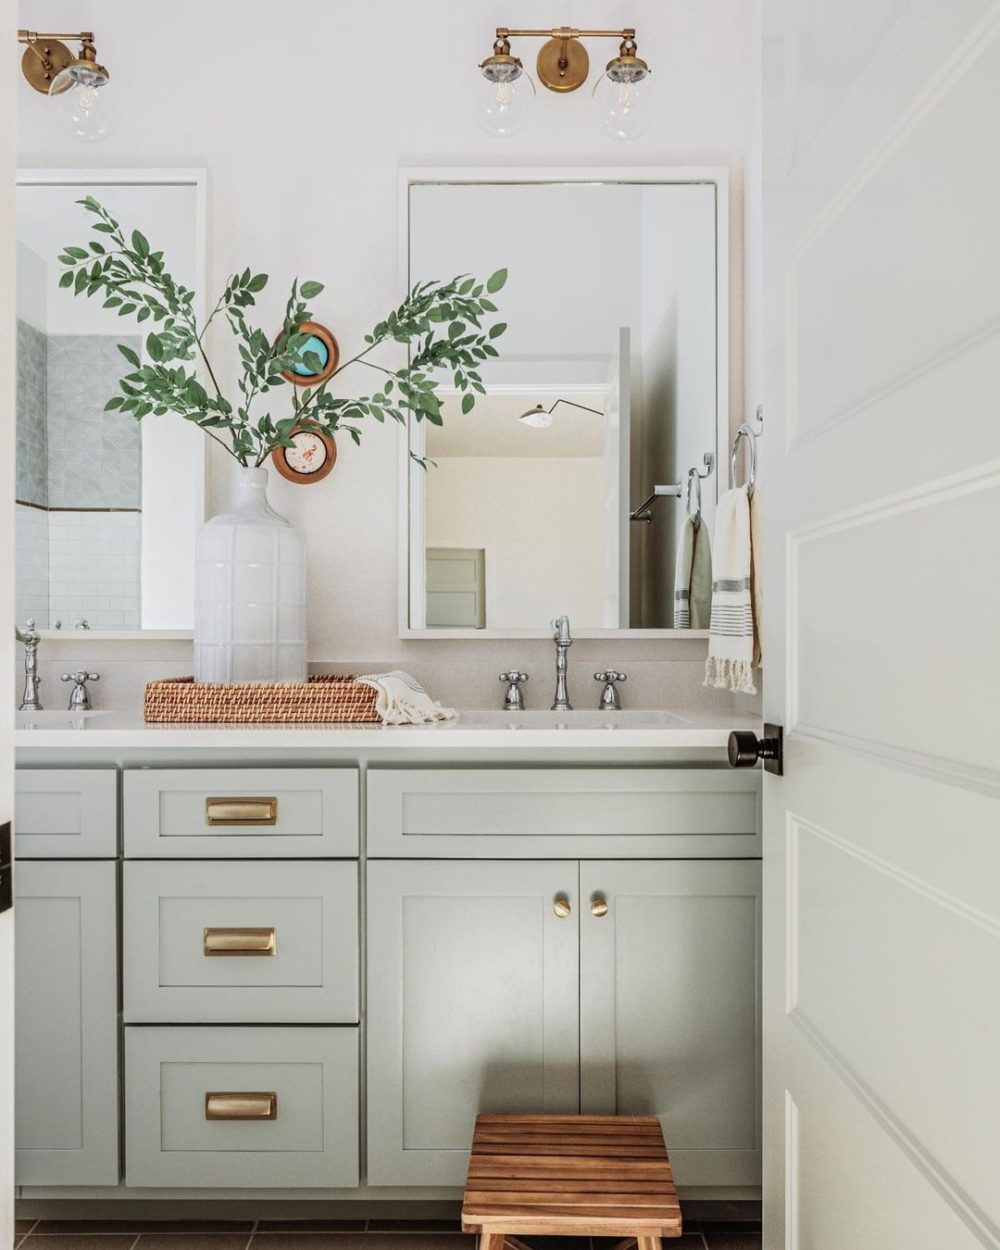 Love this beautiful bathroom design with soft gray cabinets and mixed gold and chrome metal finishes - bathroom ideas - bathroom vanity - bathroom cabinets - bathroom remodel - kelsey leigh